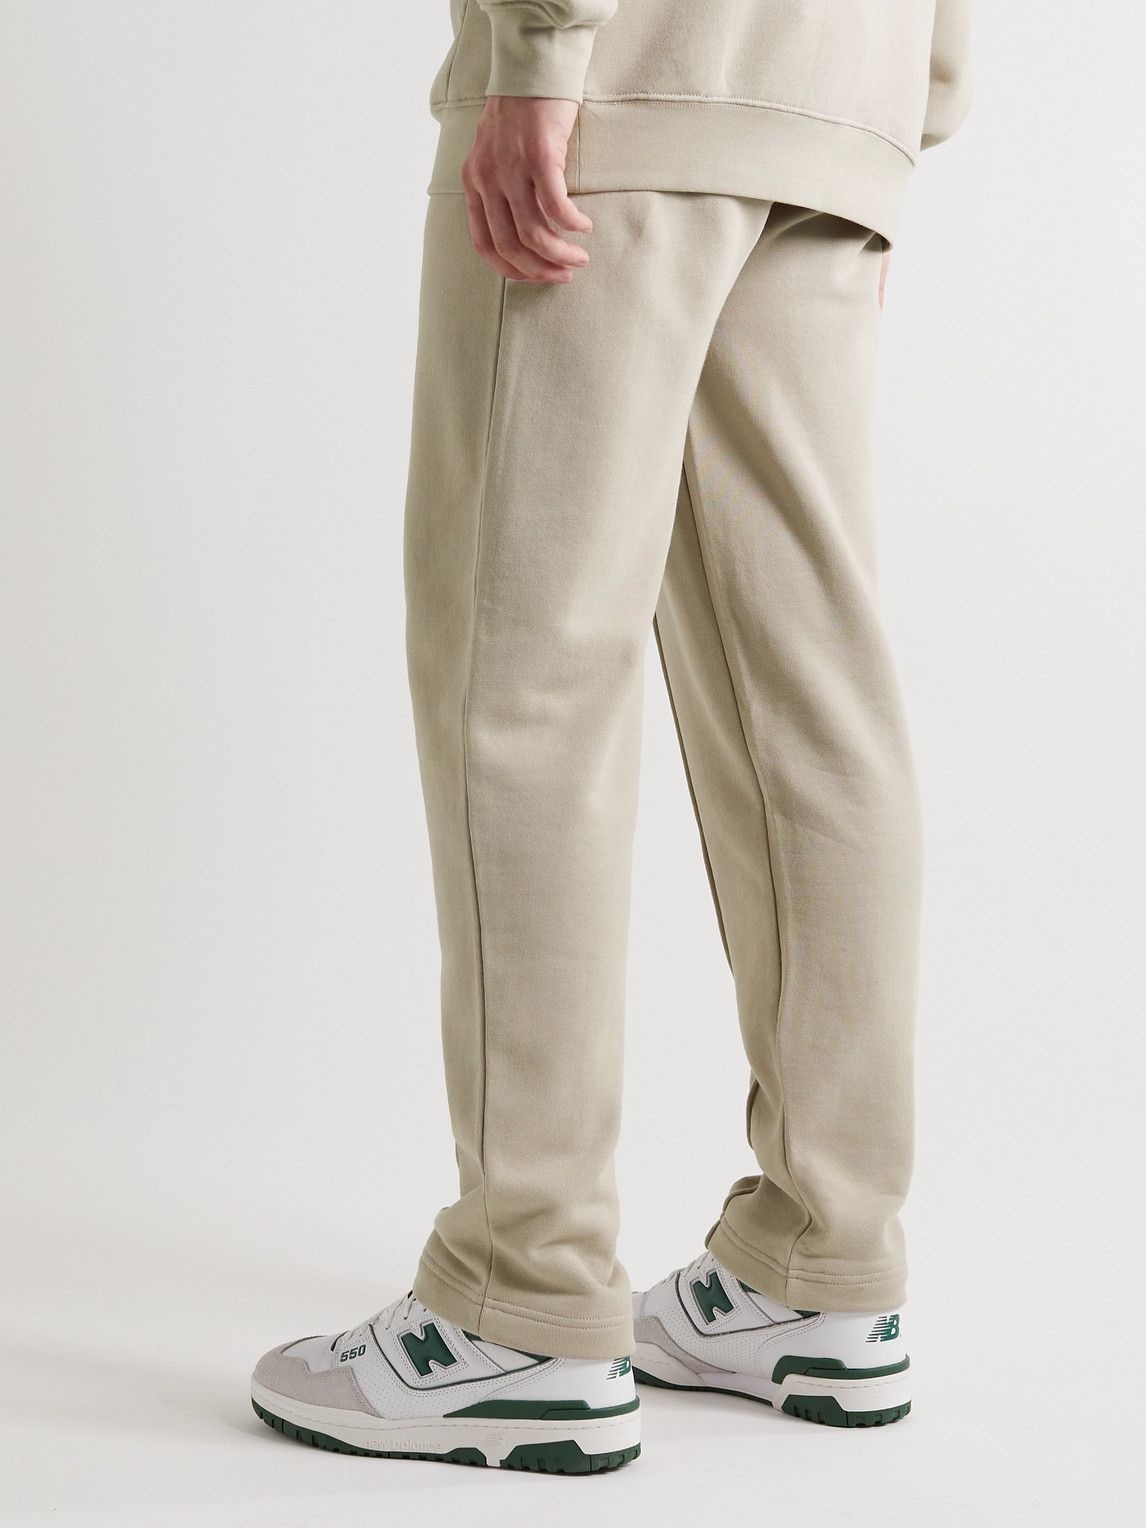 NINETY PERCENT Tapered Organic Cotton-Jersey Sweatpants for Men